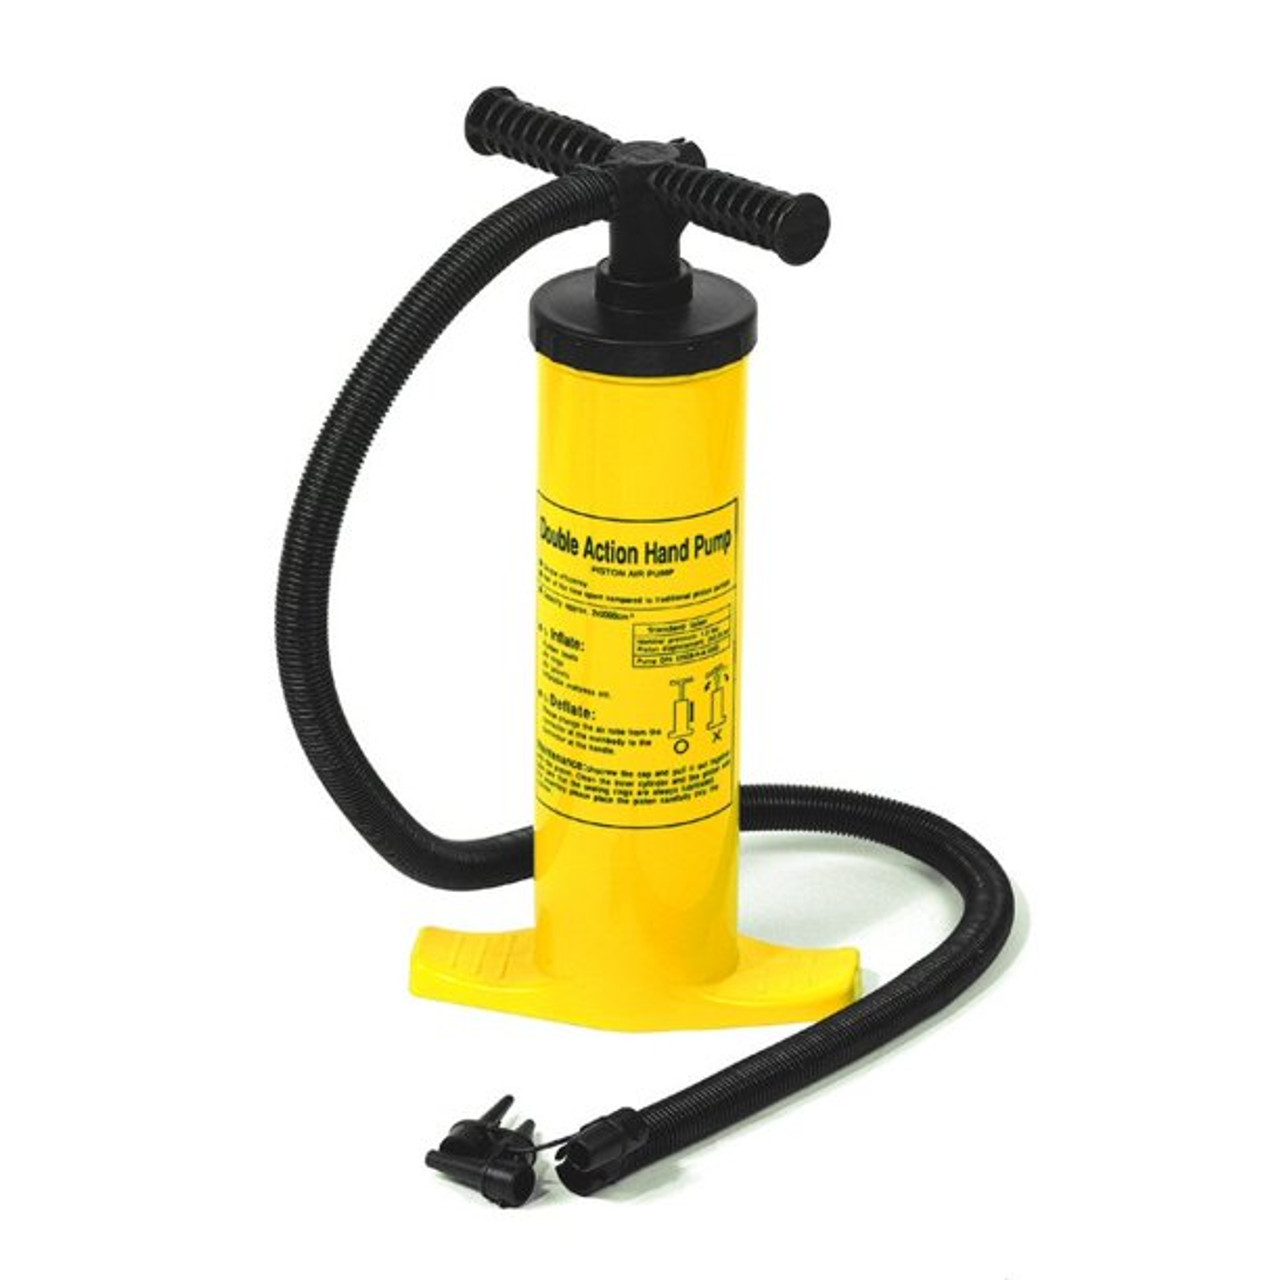 Swimline Bellows Foot Pump For Inflating Swimming Pool Floats & Toys 9099 